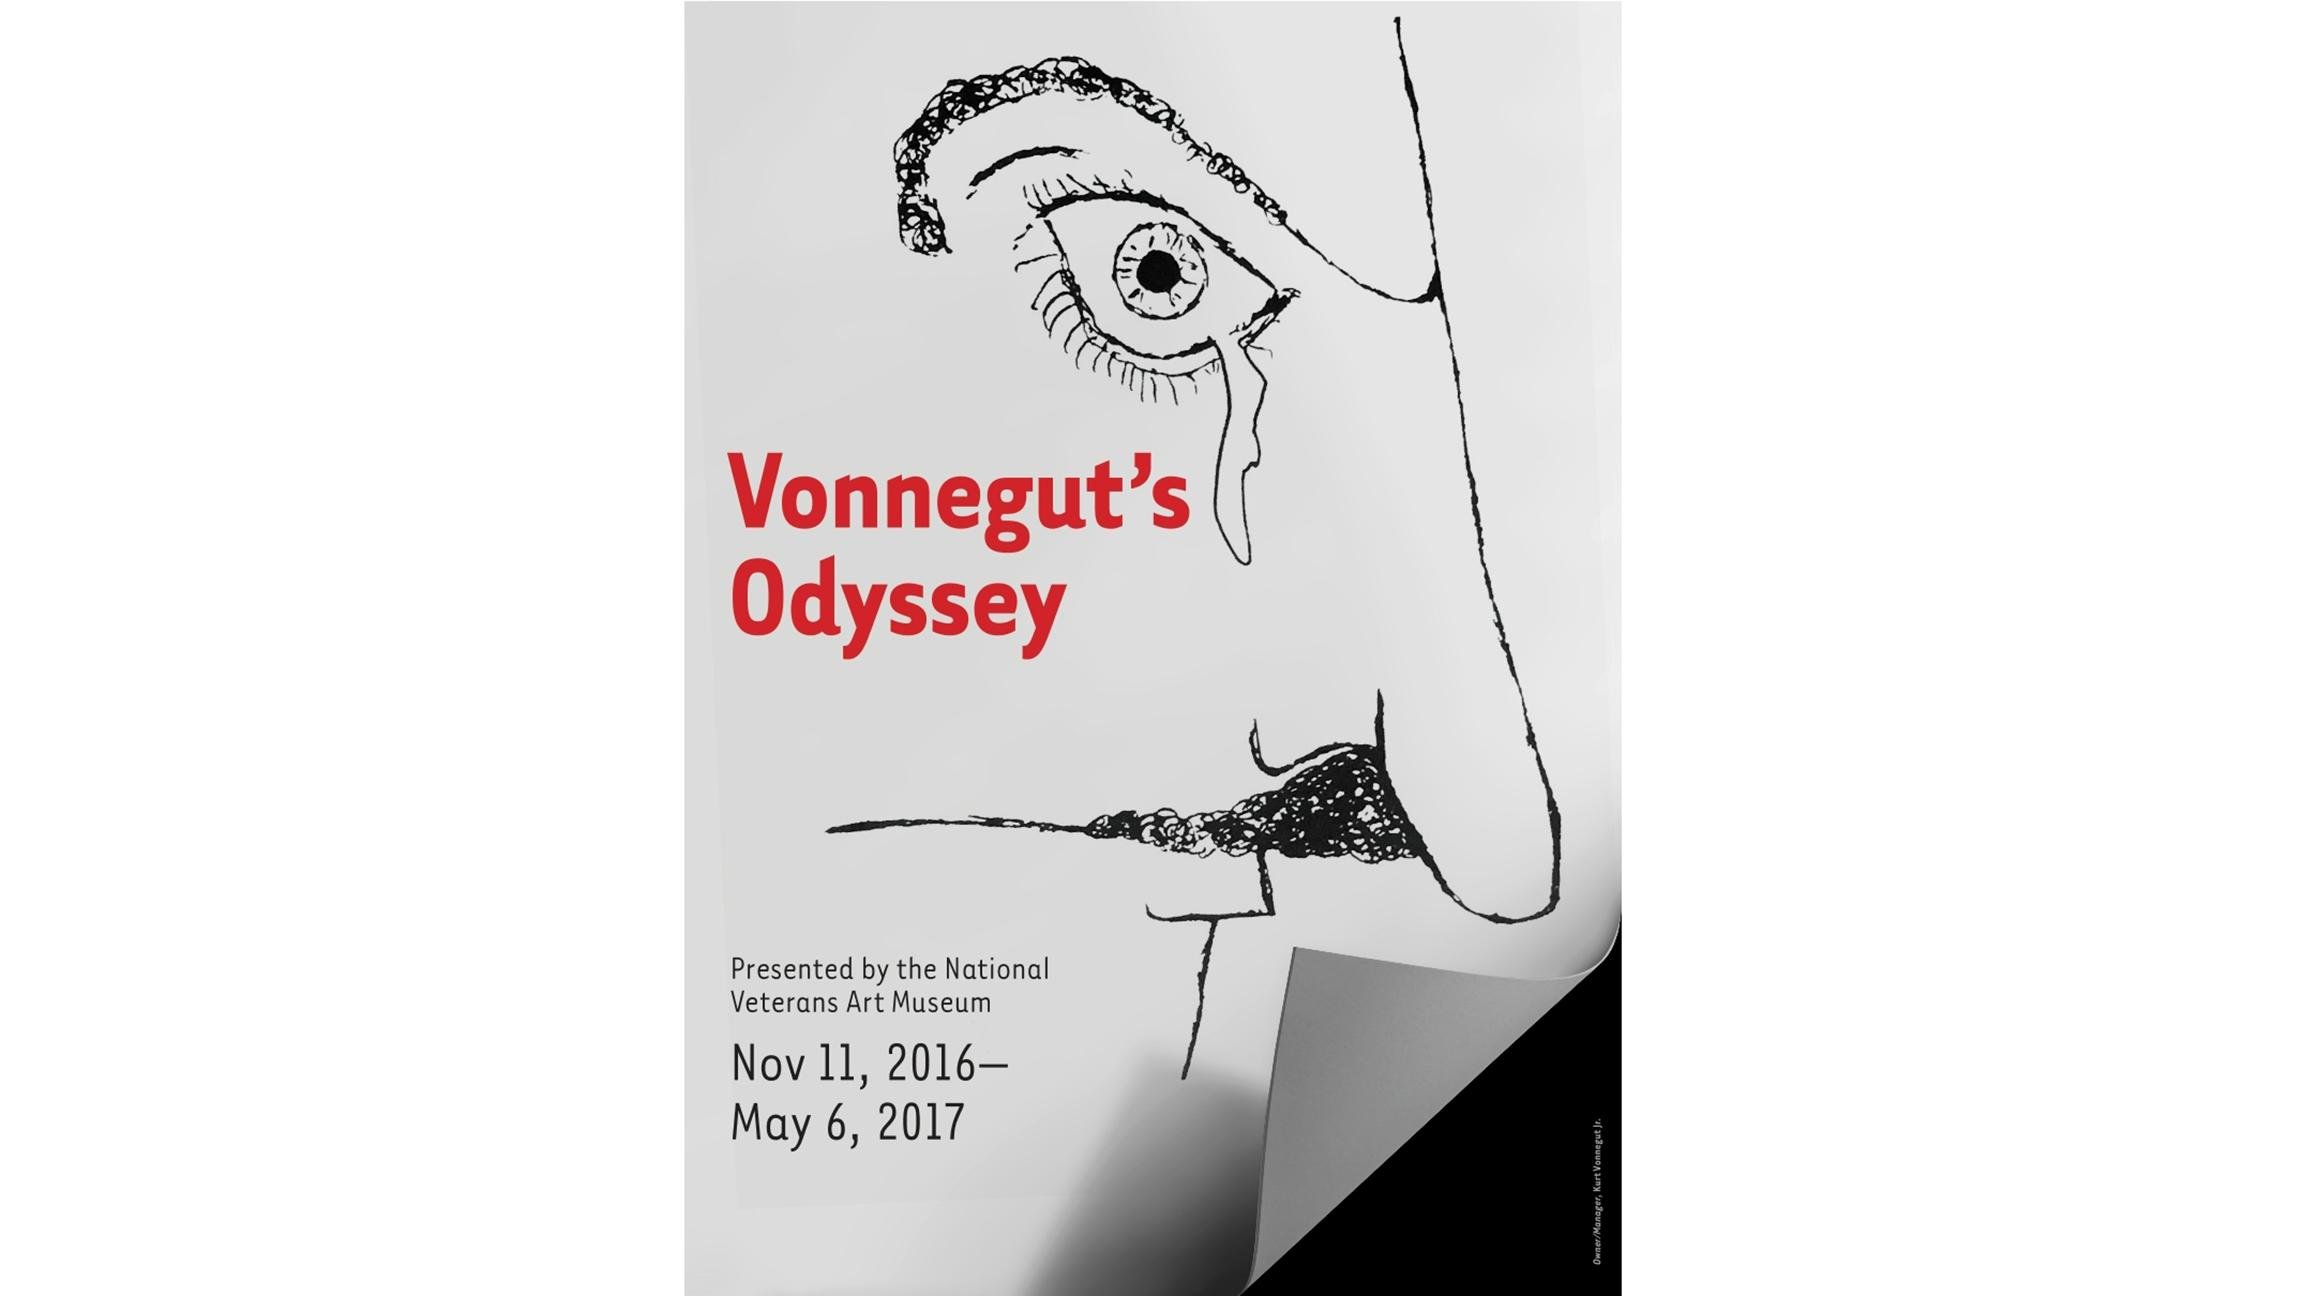 Kurt Vonnegut’s drawings are on display starting Friday at the National Veterans Art Museum.  